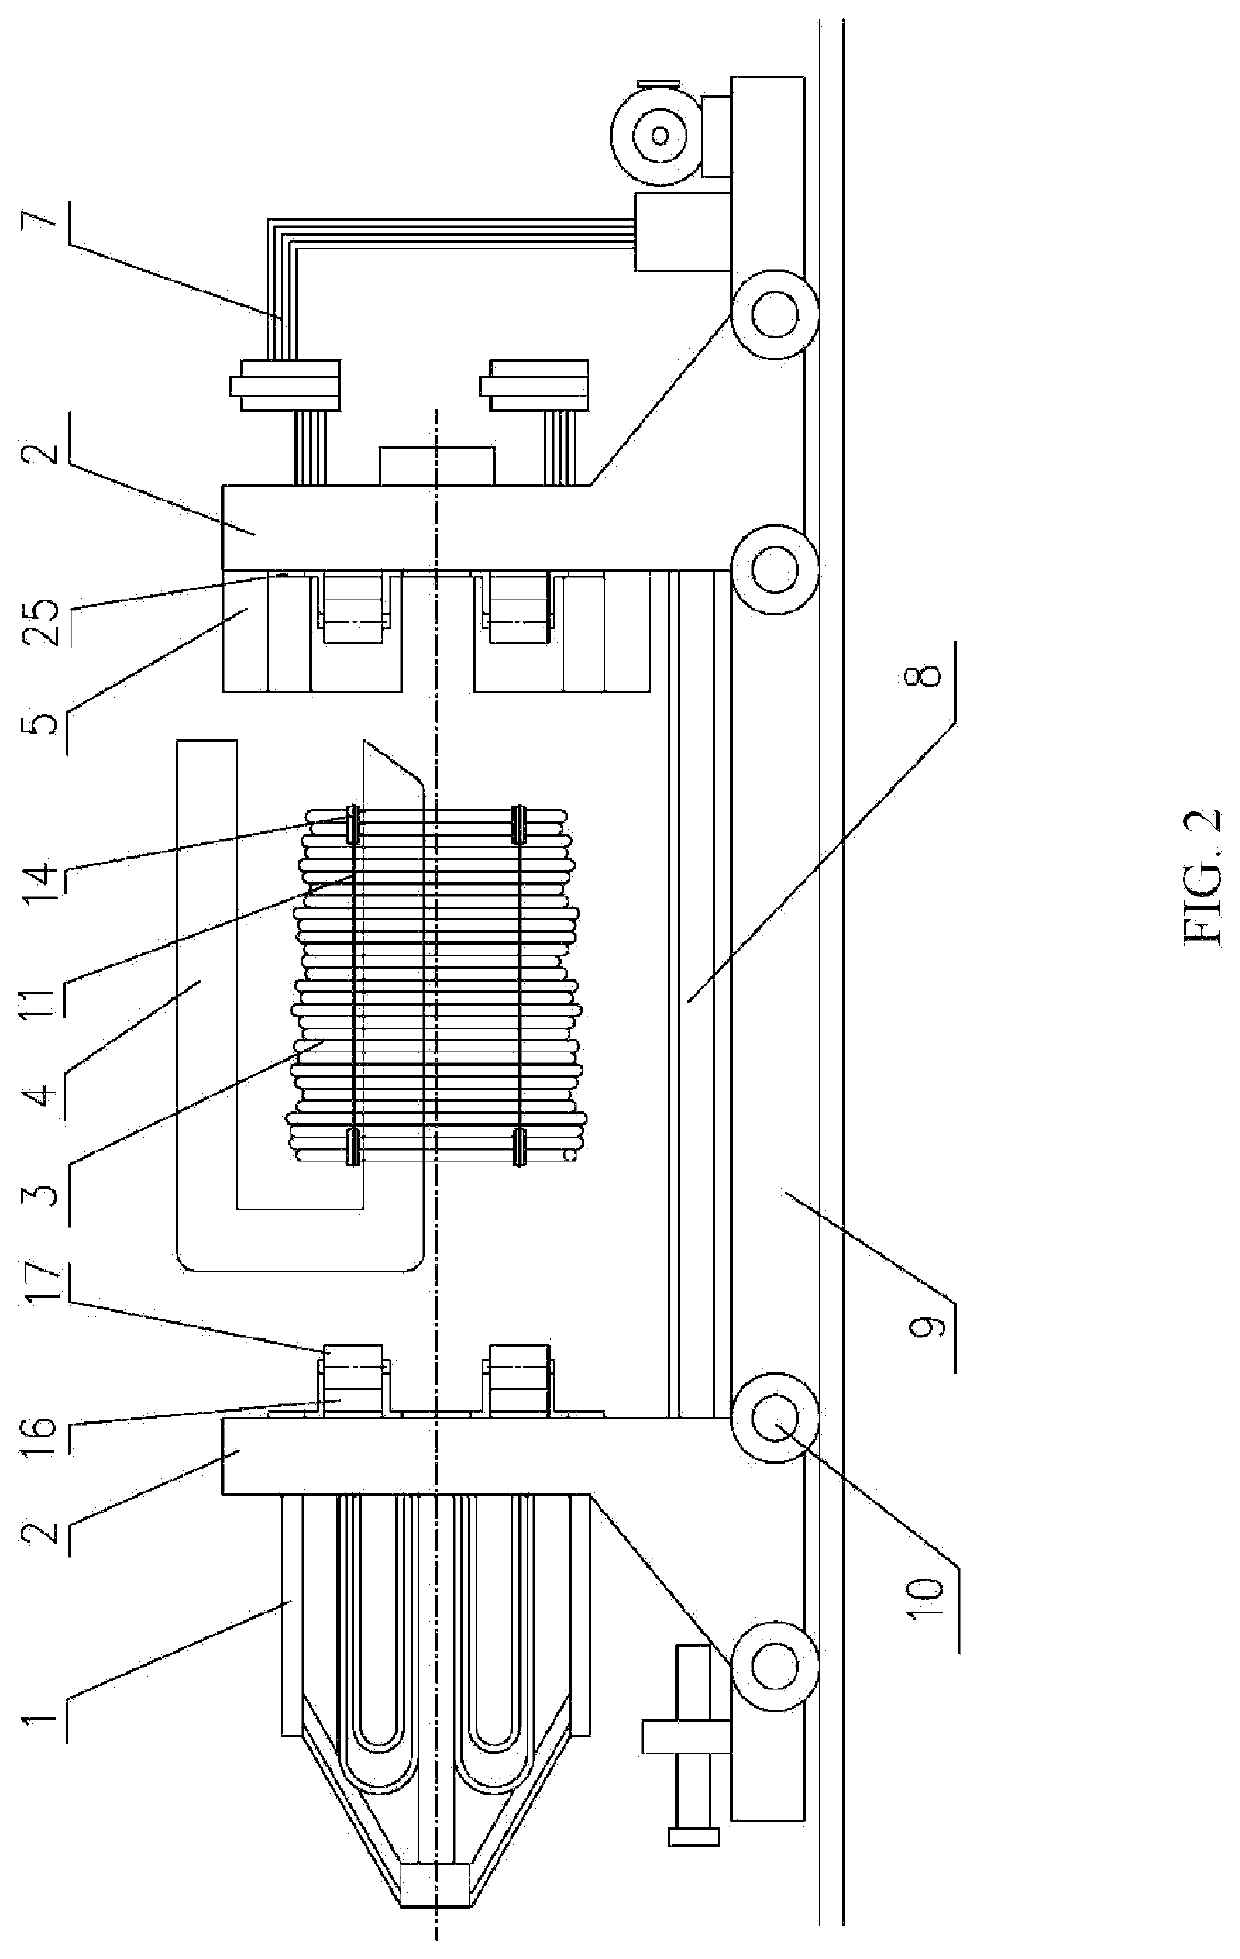 Gasket placement mechanism for high speed wire rod baling machine and gasket structure